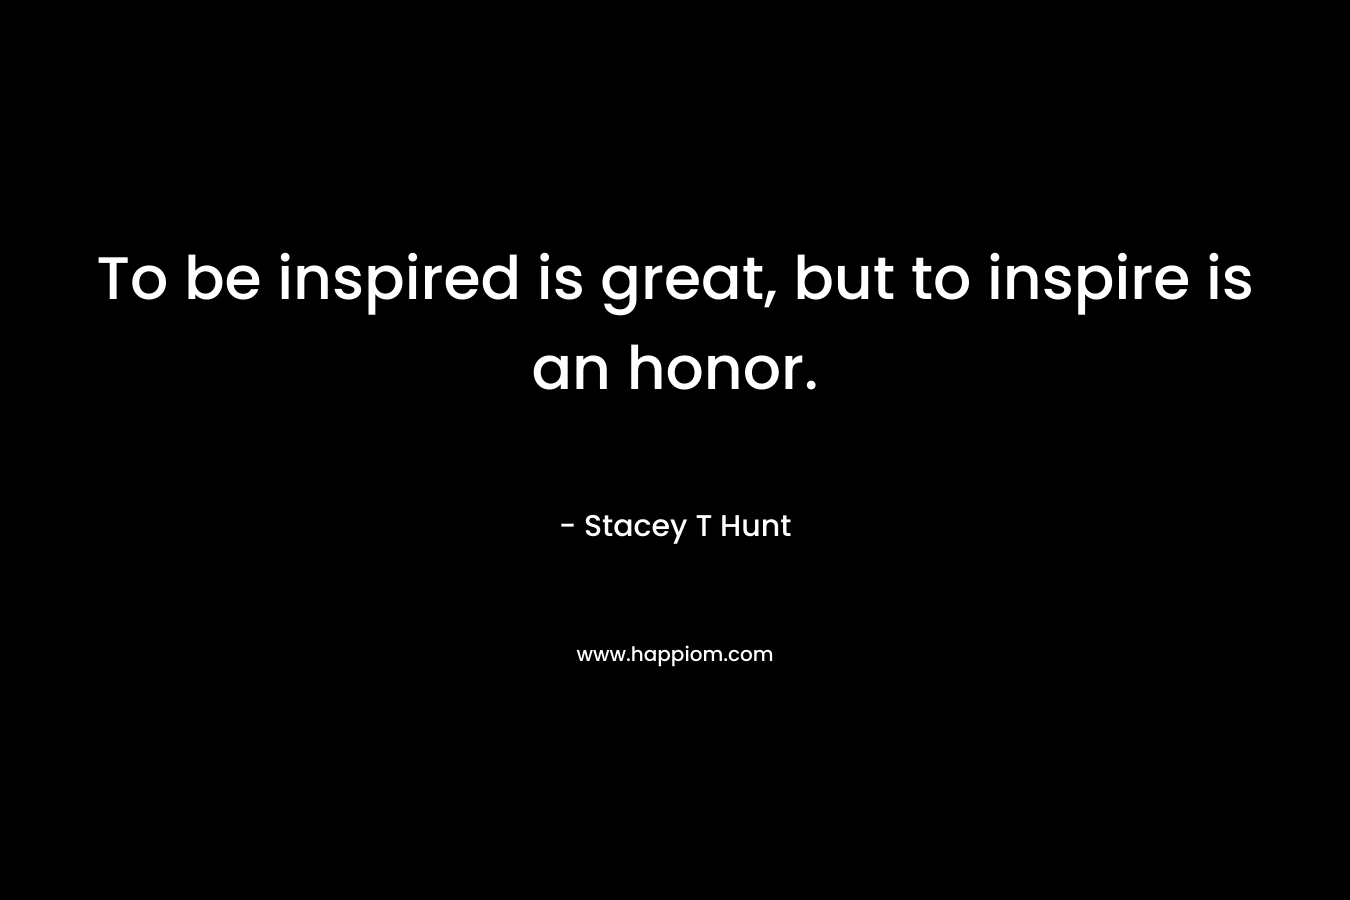 To be inspired is great, but to inspire is an honor. – Stacey T Hunt